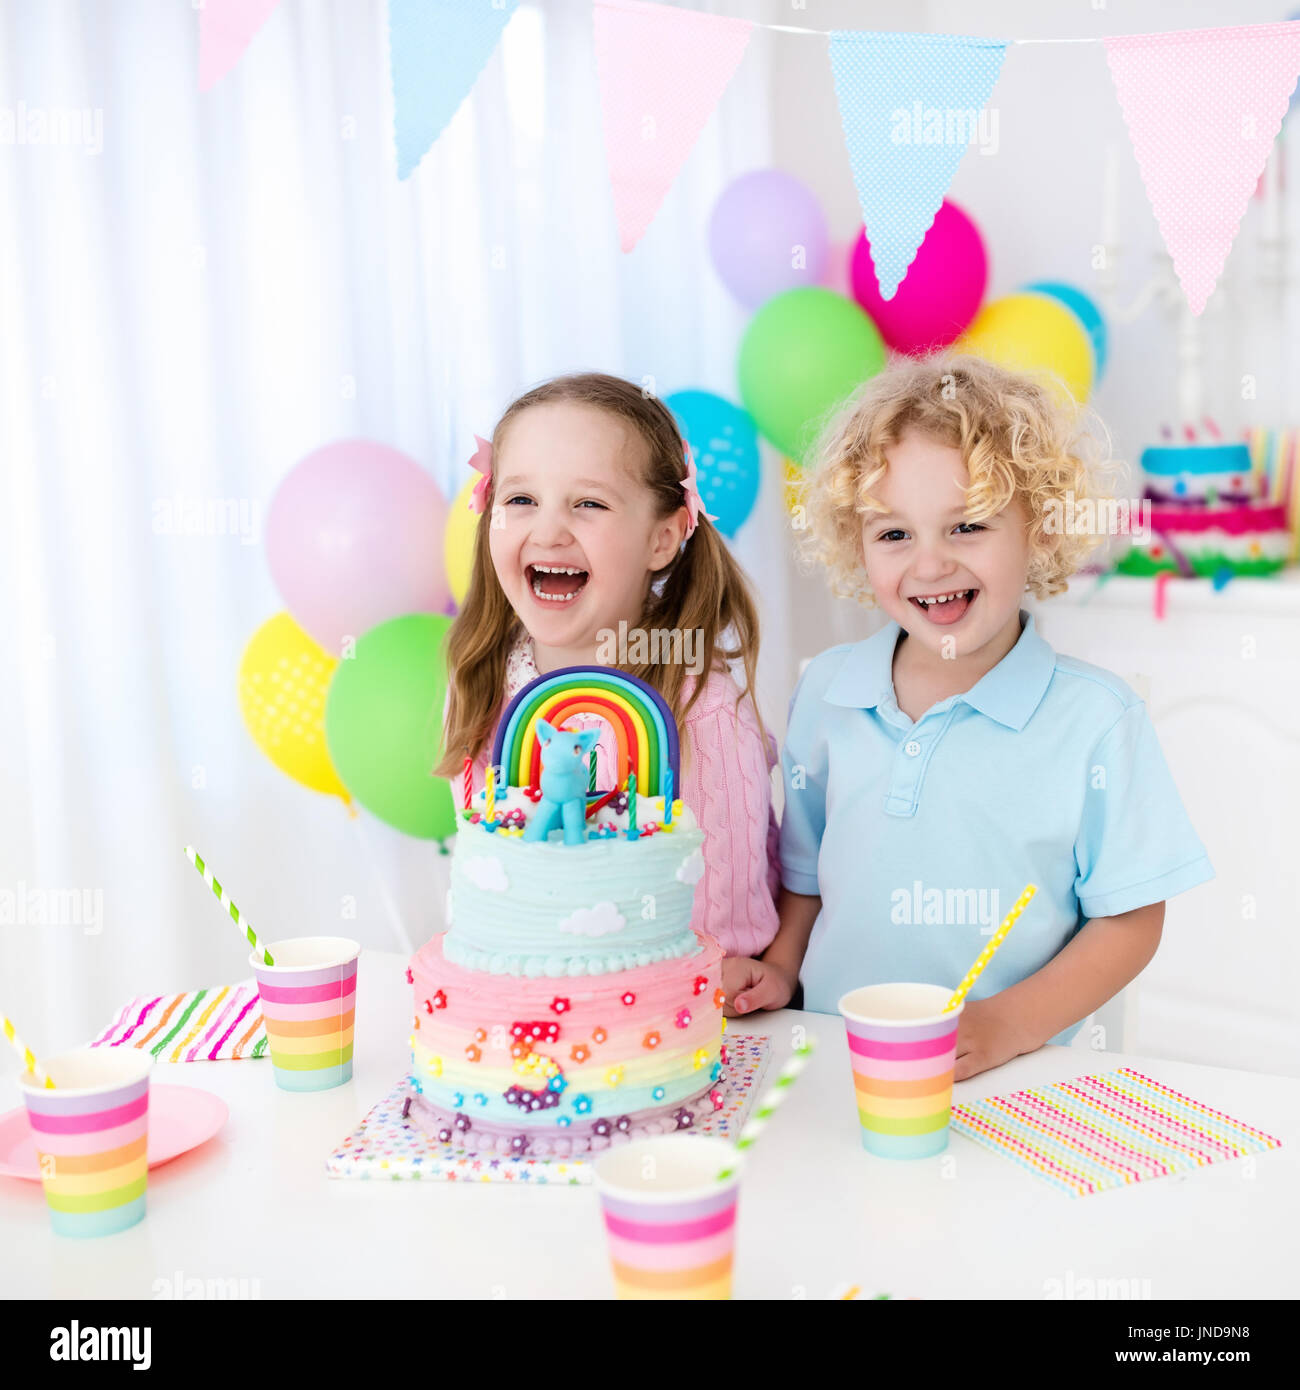 Kids birthday party with colorful pastel decoration and rainbow cake. Girl and boy with sweets, candy and fruit. Balloons and banner at festive decora Stock Photo